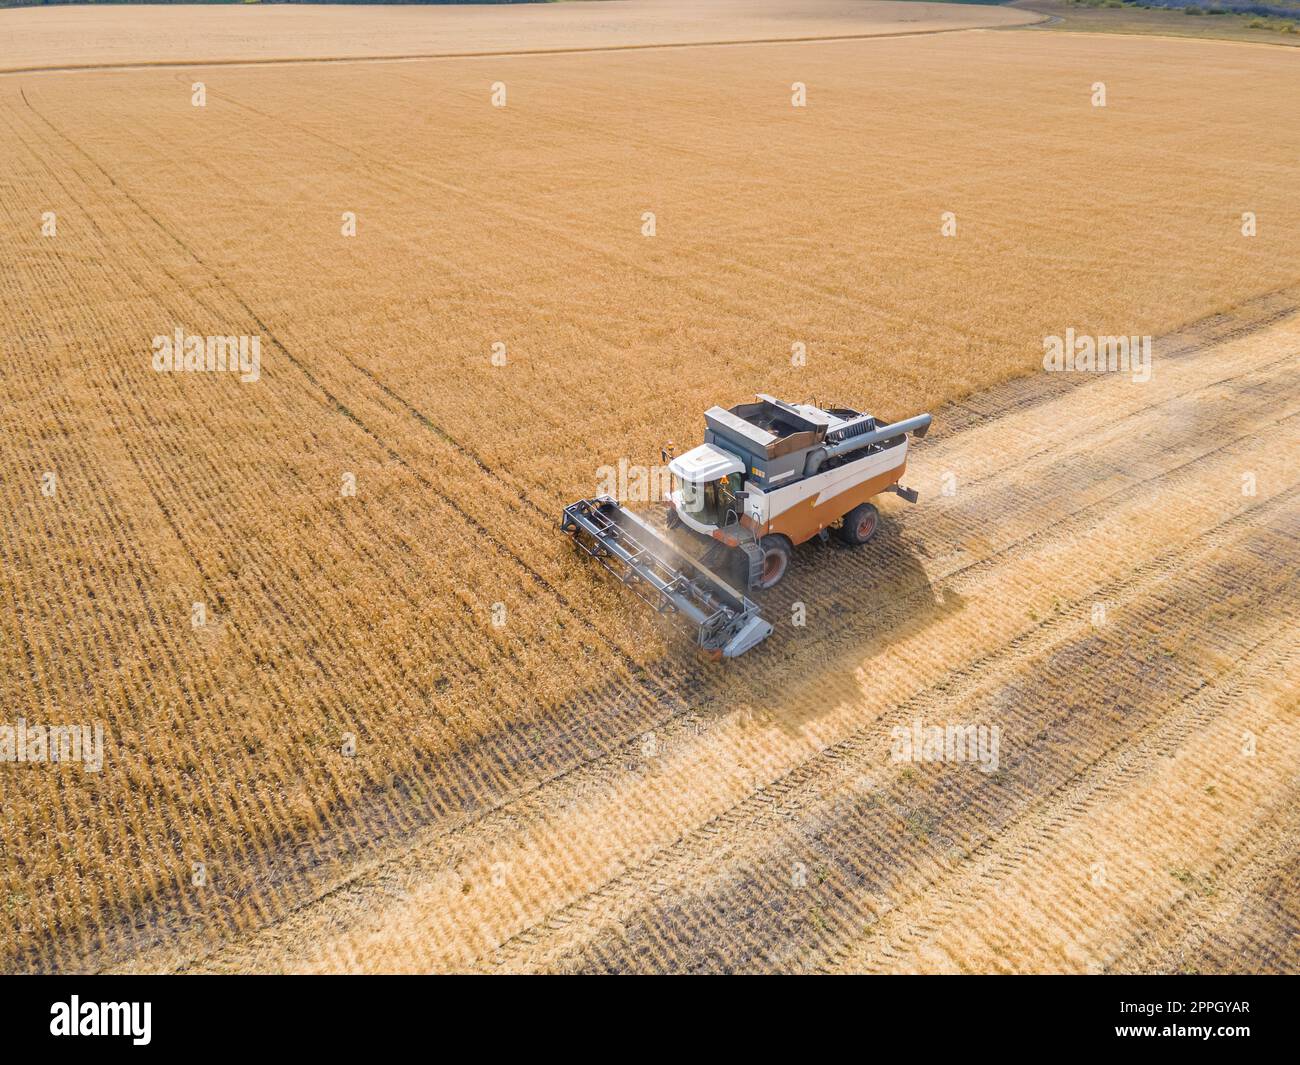 Harvest wheat grain and crop aerial view.Harvesting wheat,oats, barley in fields,ranches and farmlands.Combines mow in the field.Agro-industry.Combine Harvester Cutting on wheat filed.Machine harvest Stock Photo